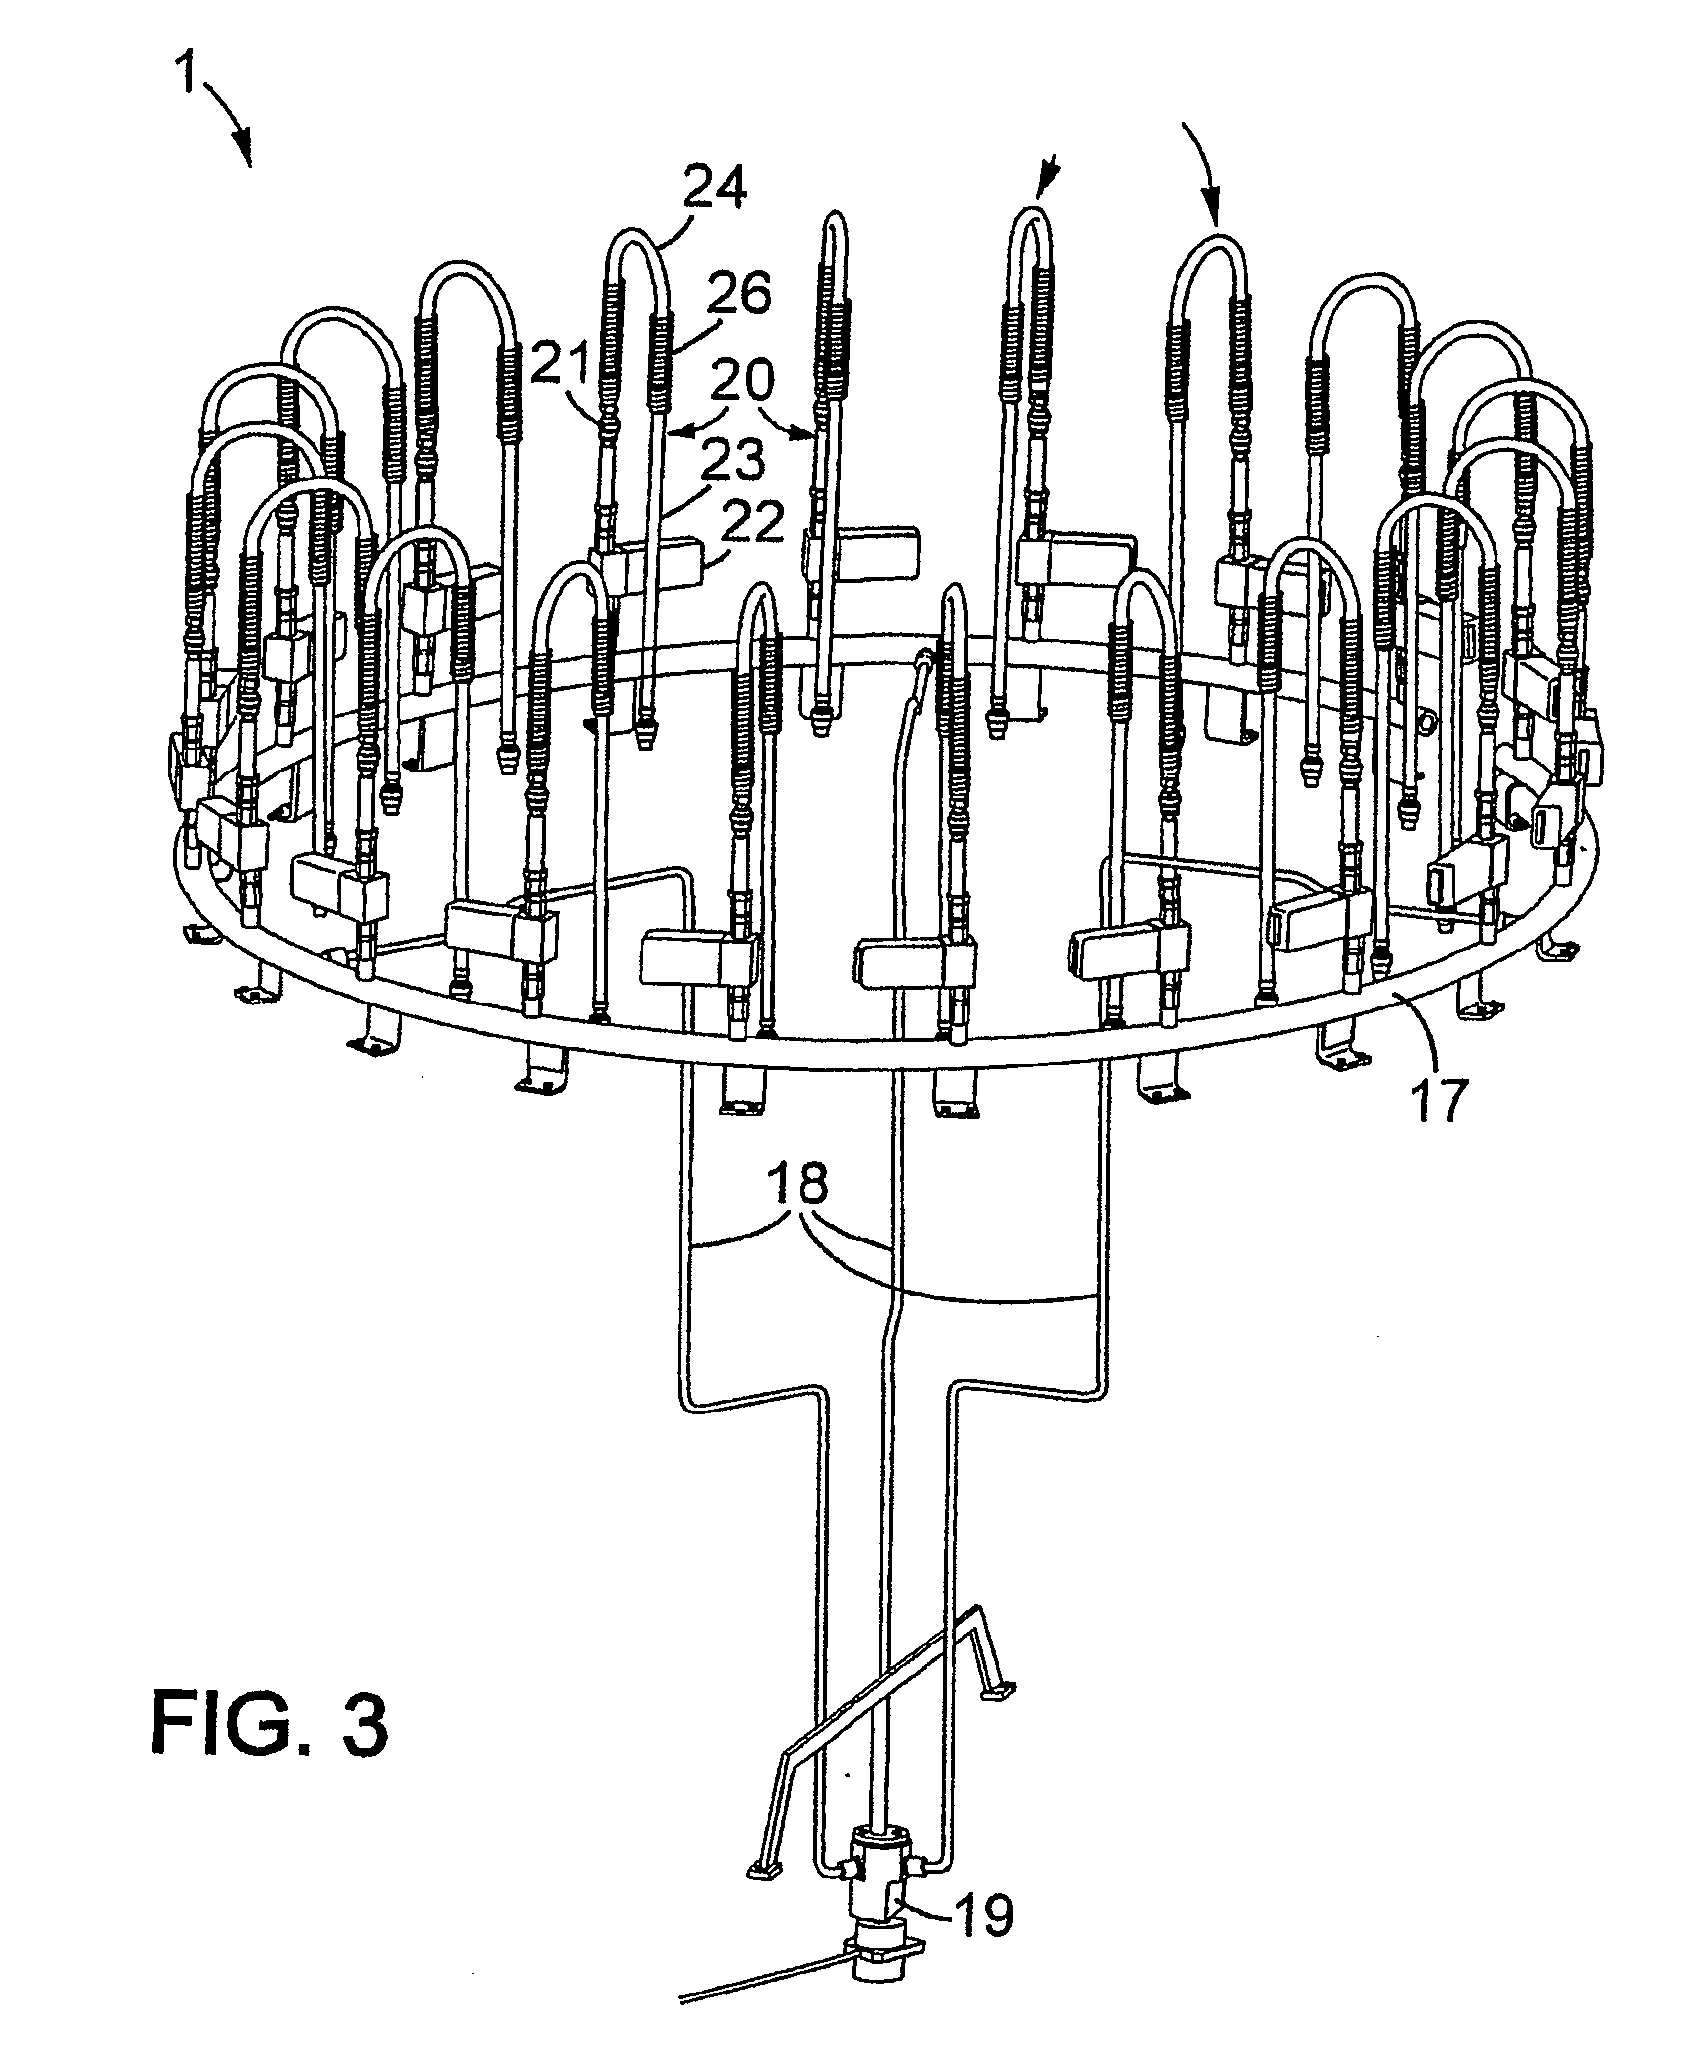 Apparatus for Plasma-Enhanced Chemical Vapor Deposition (Pecvd) of an Internal Barrier Layer Inside a Container, Said Apparatus Including a Gas Line Isolated by a Solenoid Valve